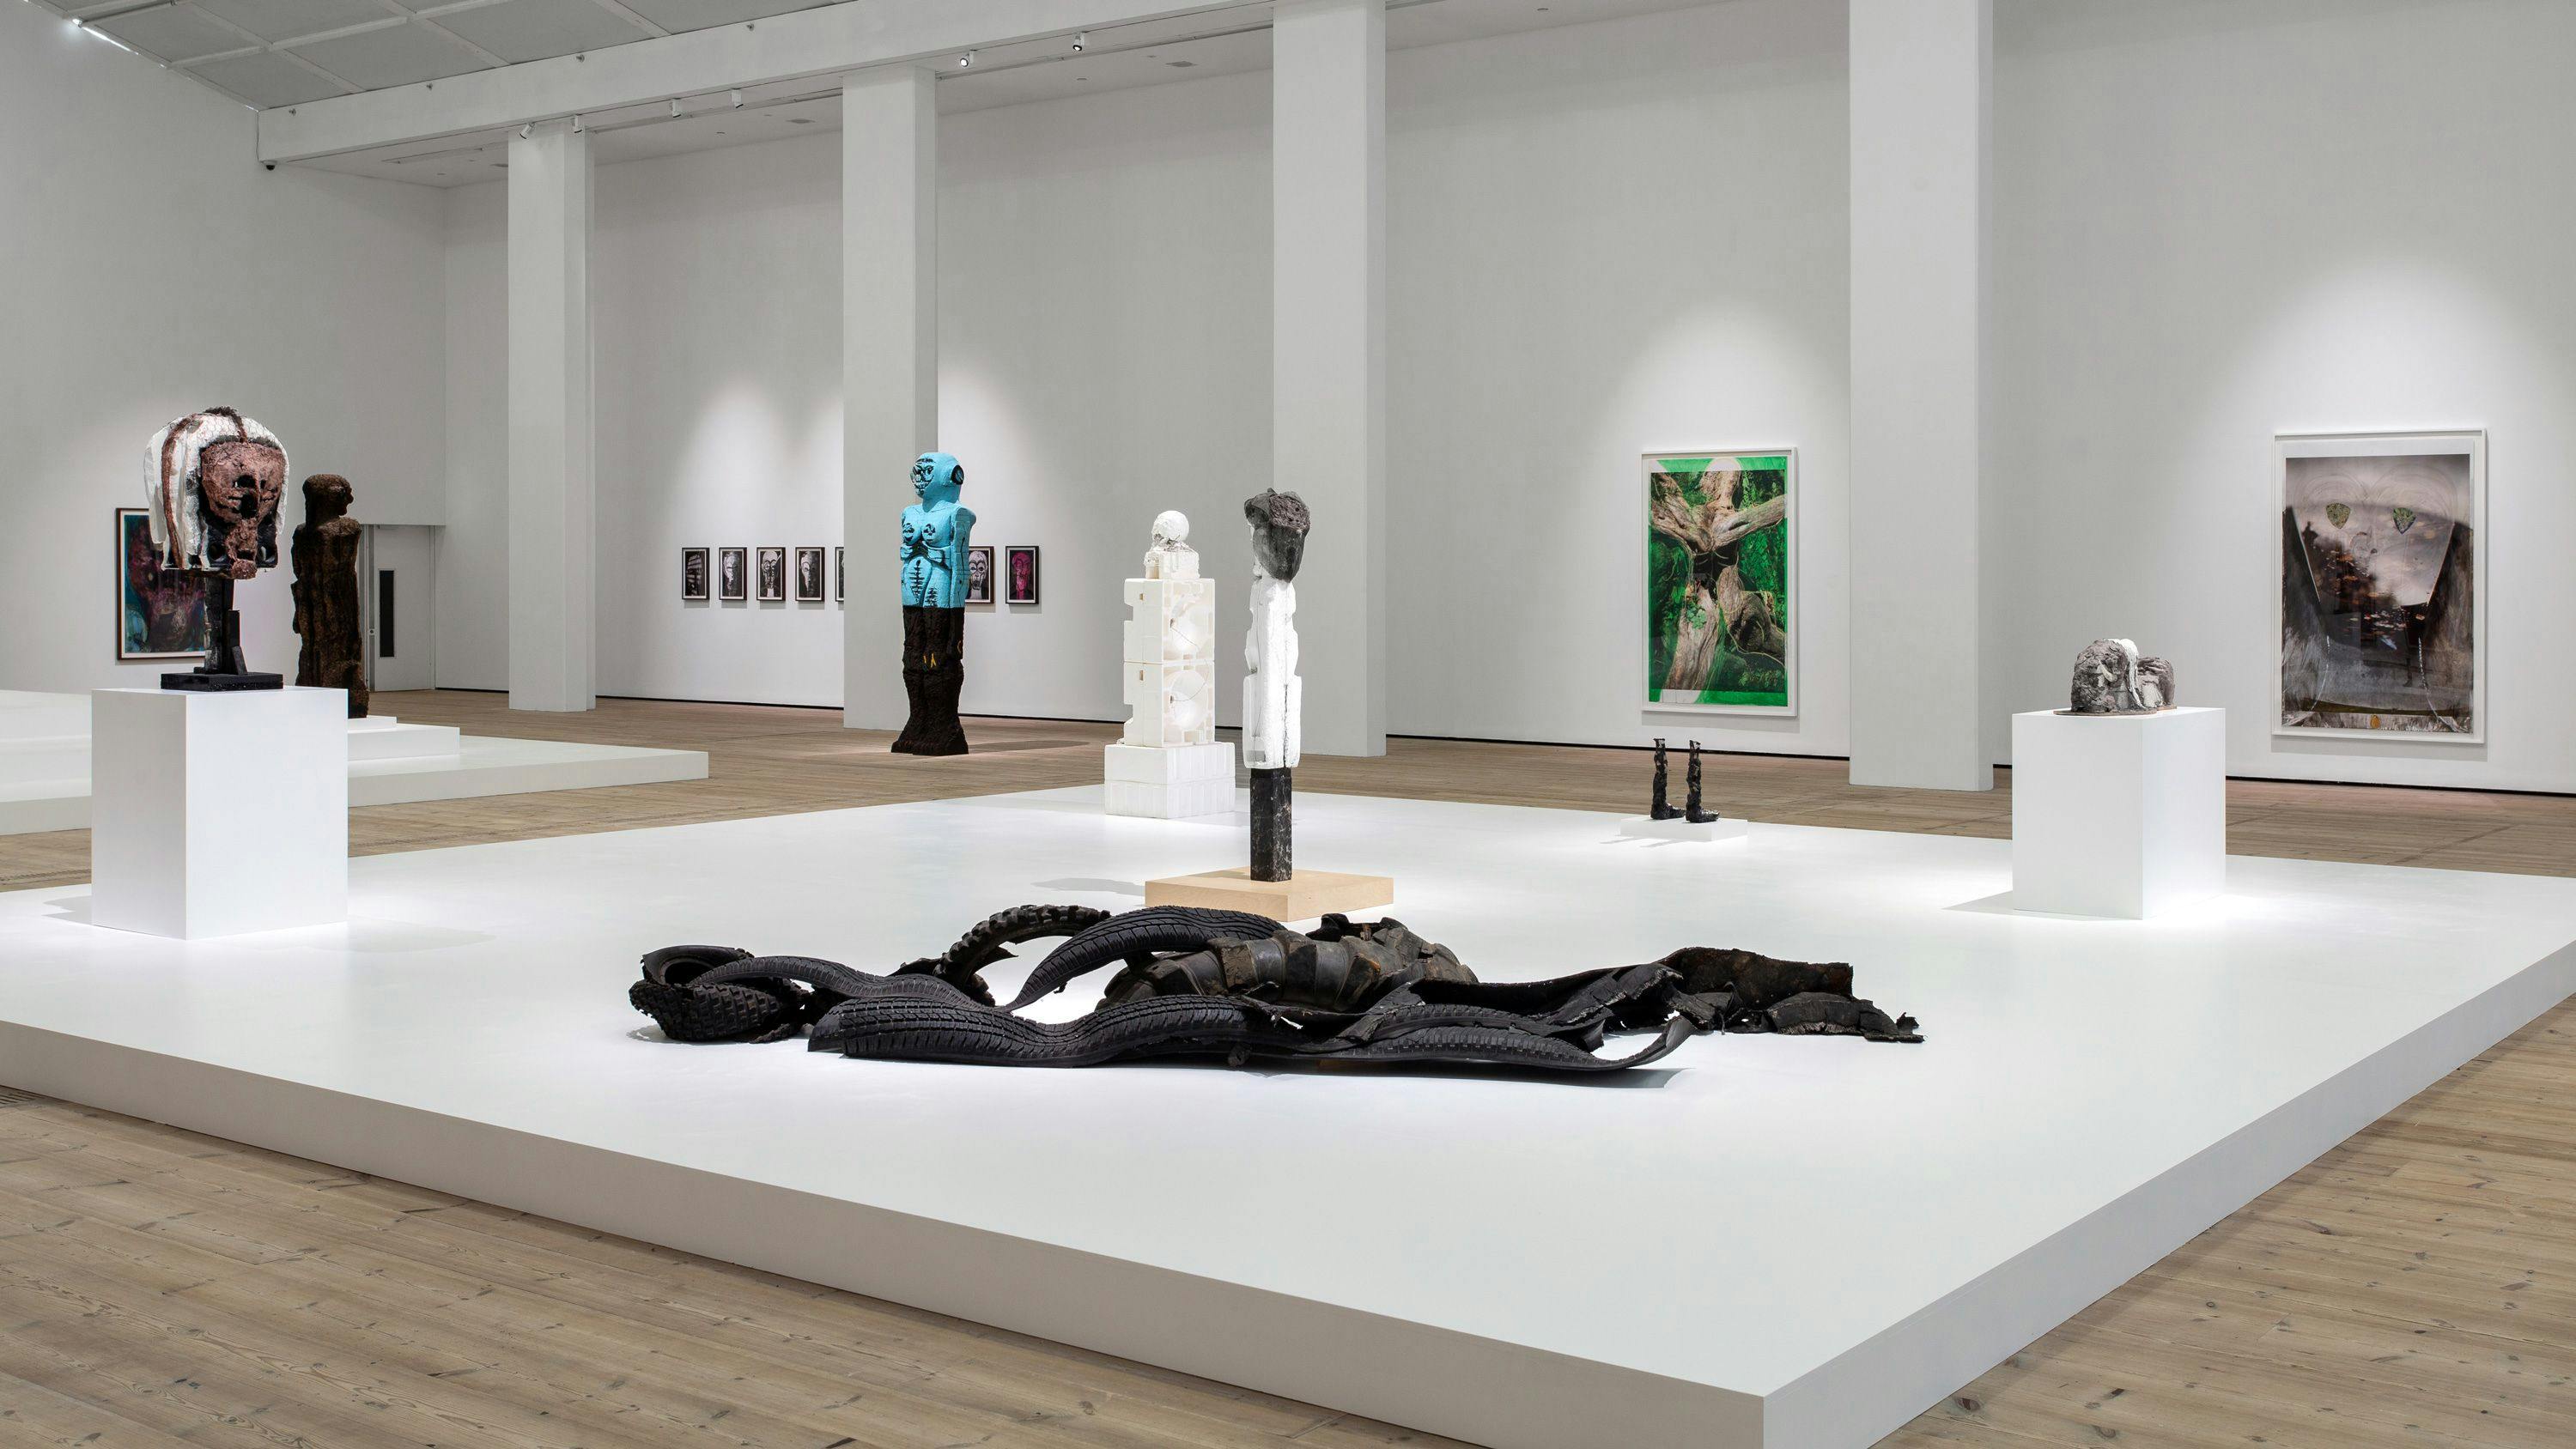 Installation view of the exhibition, Huma Bhabha, Against Time at the Baltic Centre for Contemporary Art, dated 2020.